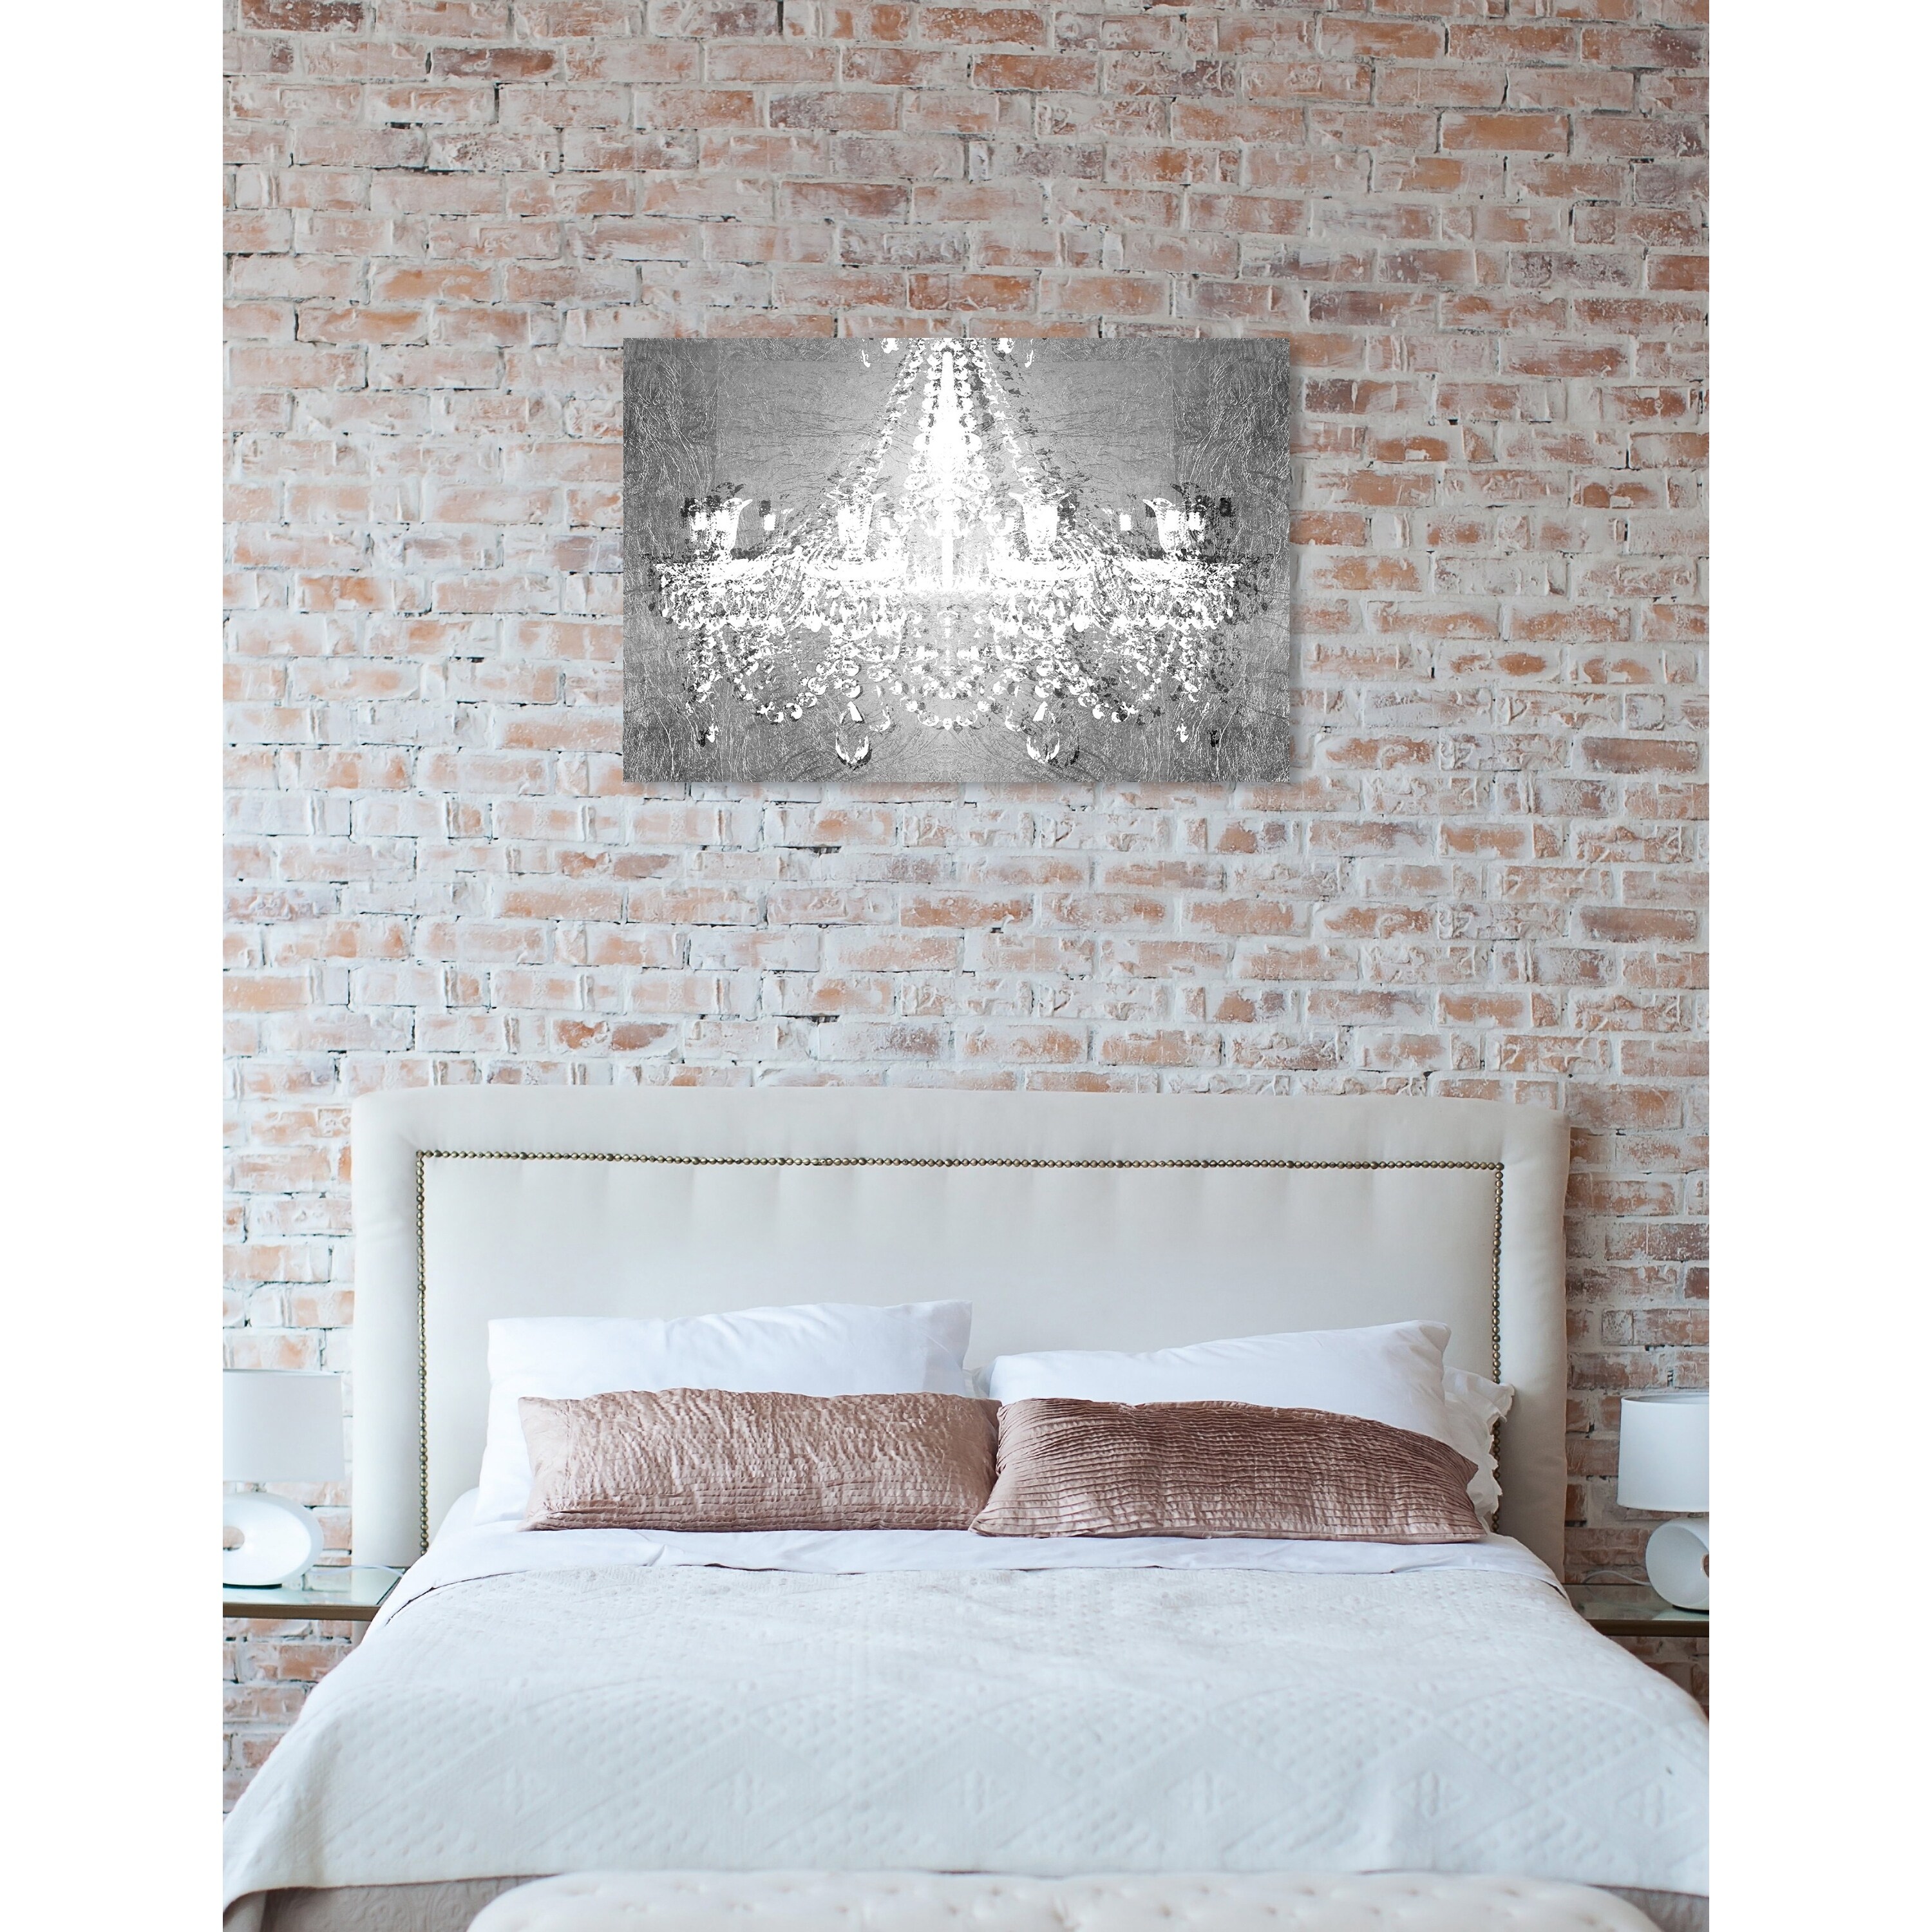 Oliver Gal 'Dramatic Entrance Chrome' Gray Glam, Fashion Chandeliers  Gallery Wrapped Canvas Art